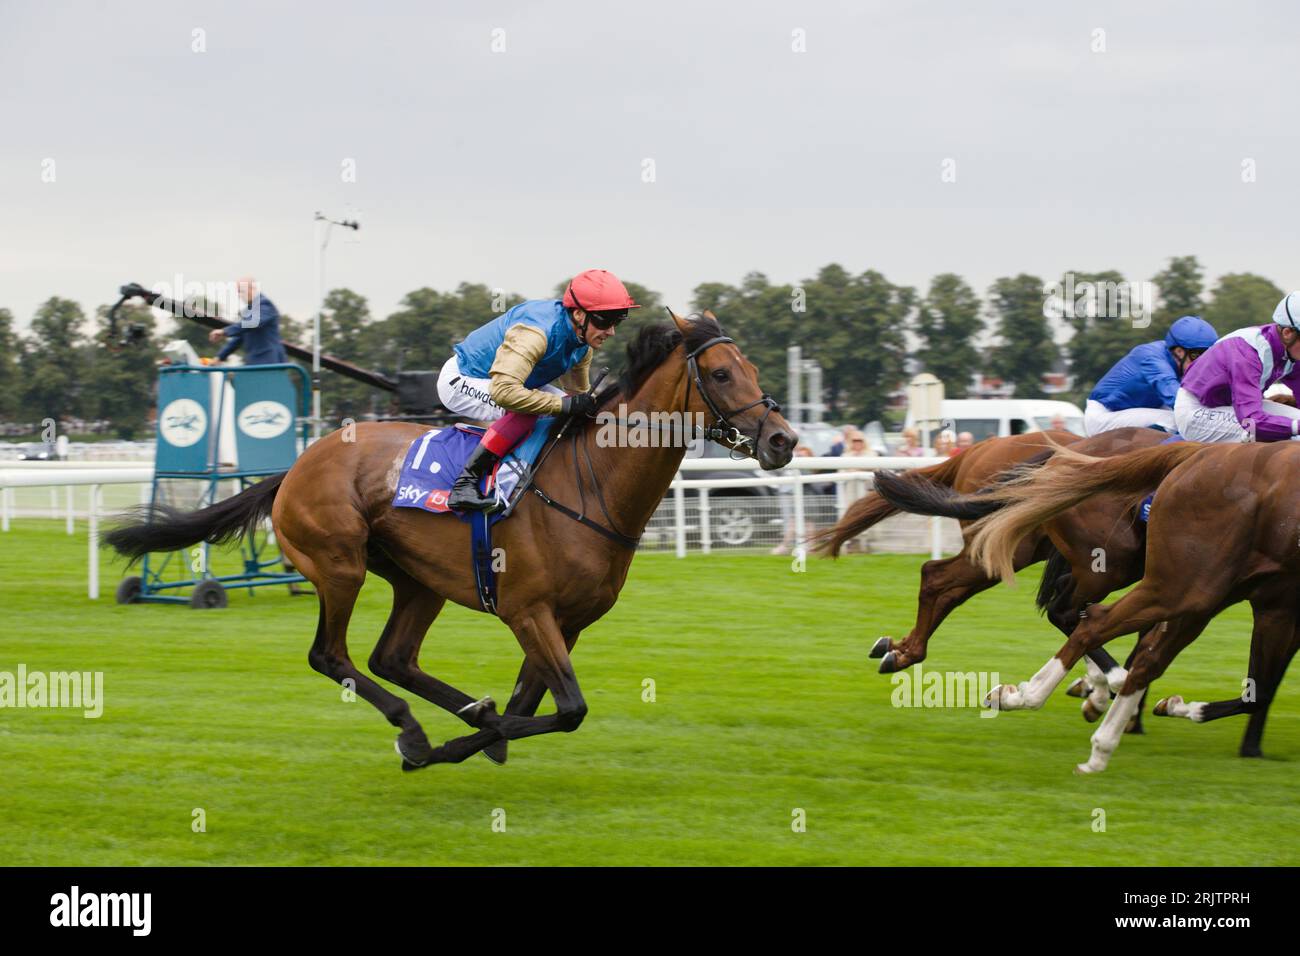 York, UK. 23rd Aug, 2023. Jockey Frankie Dettori on Gregory galloping from the starting gates during the Sky Bet Great Voltigeur Stakes at York. Credit: Ed Clews/Alamy Live News. Stock Photo